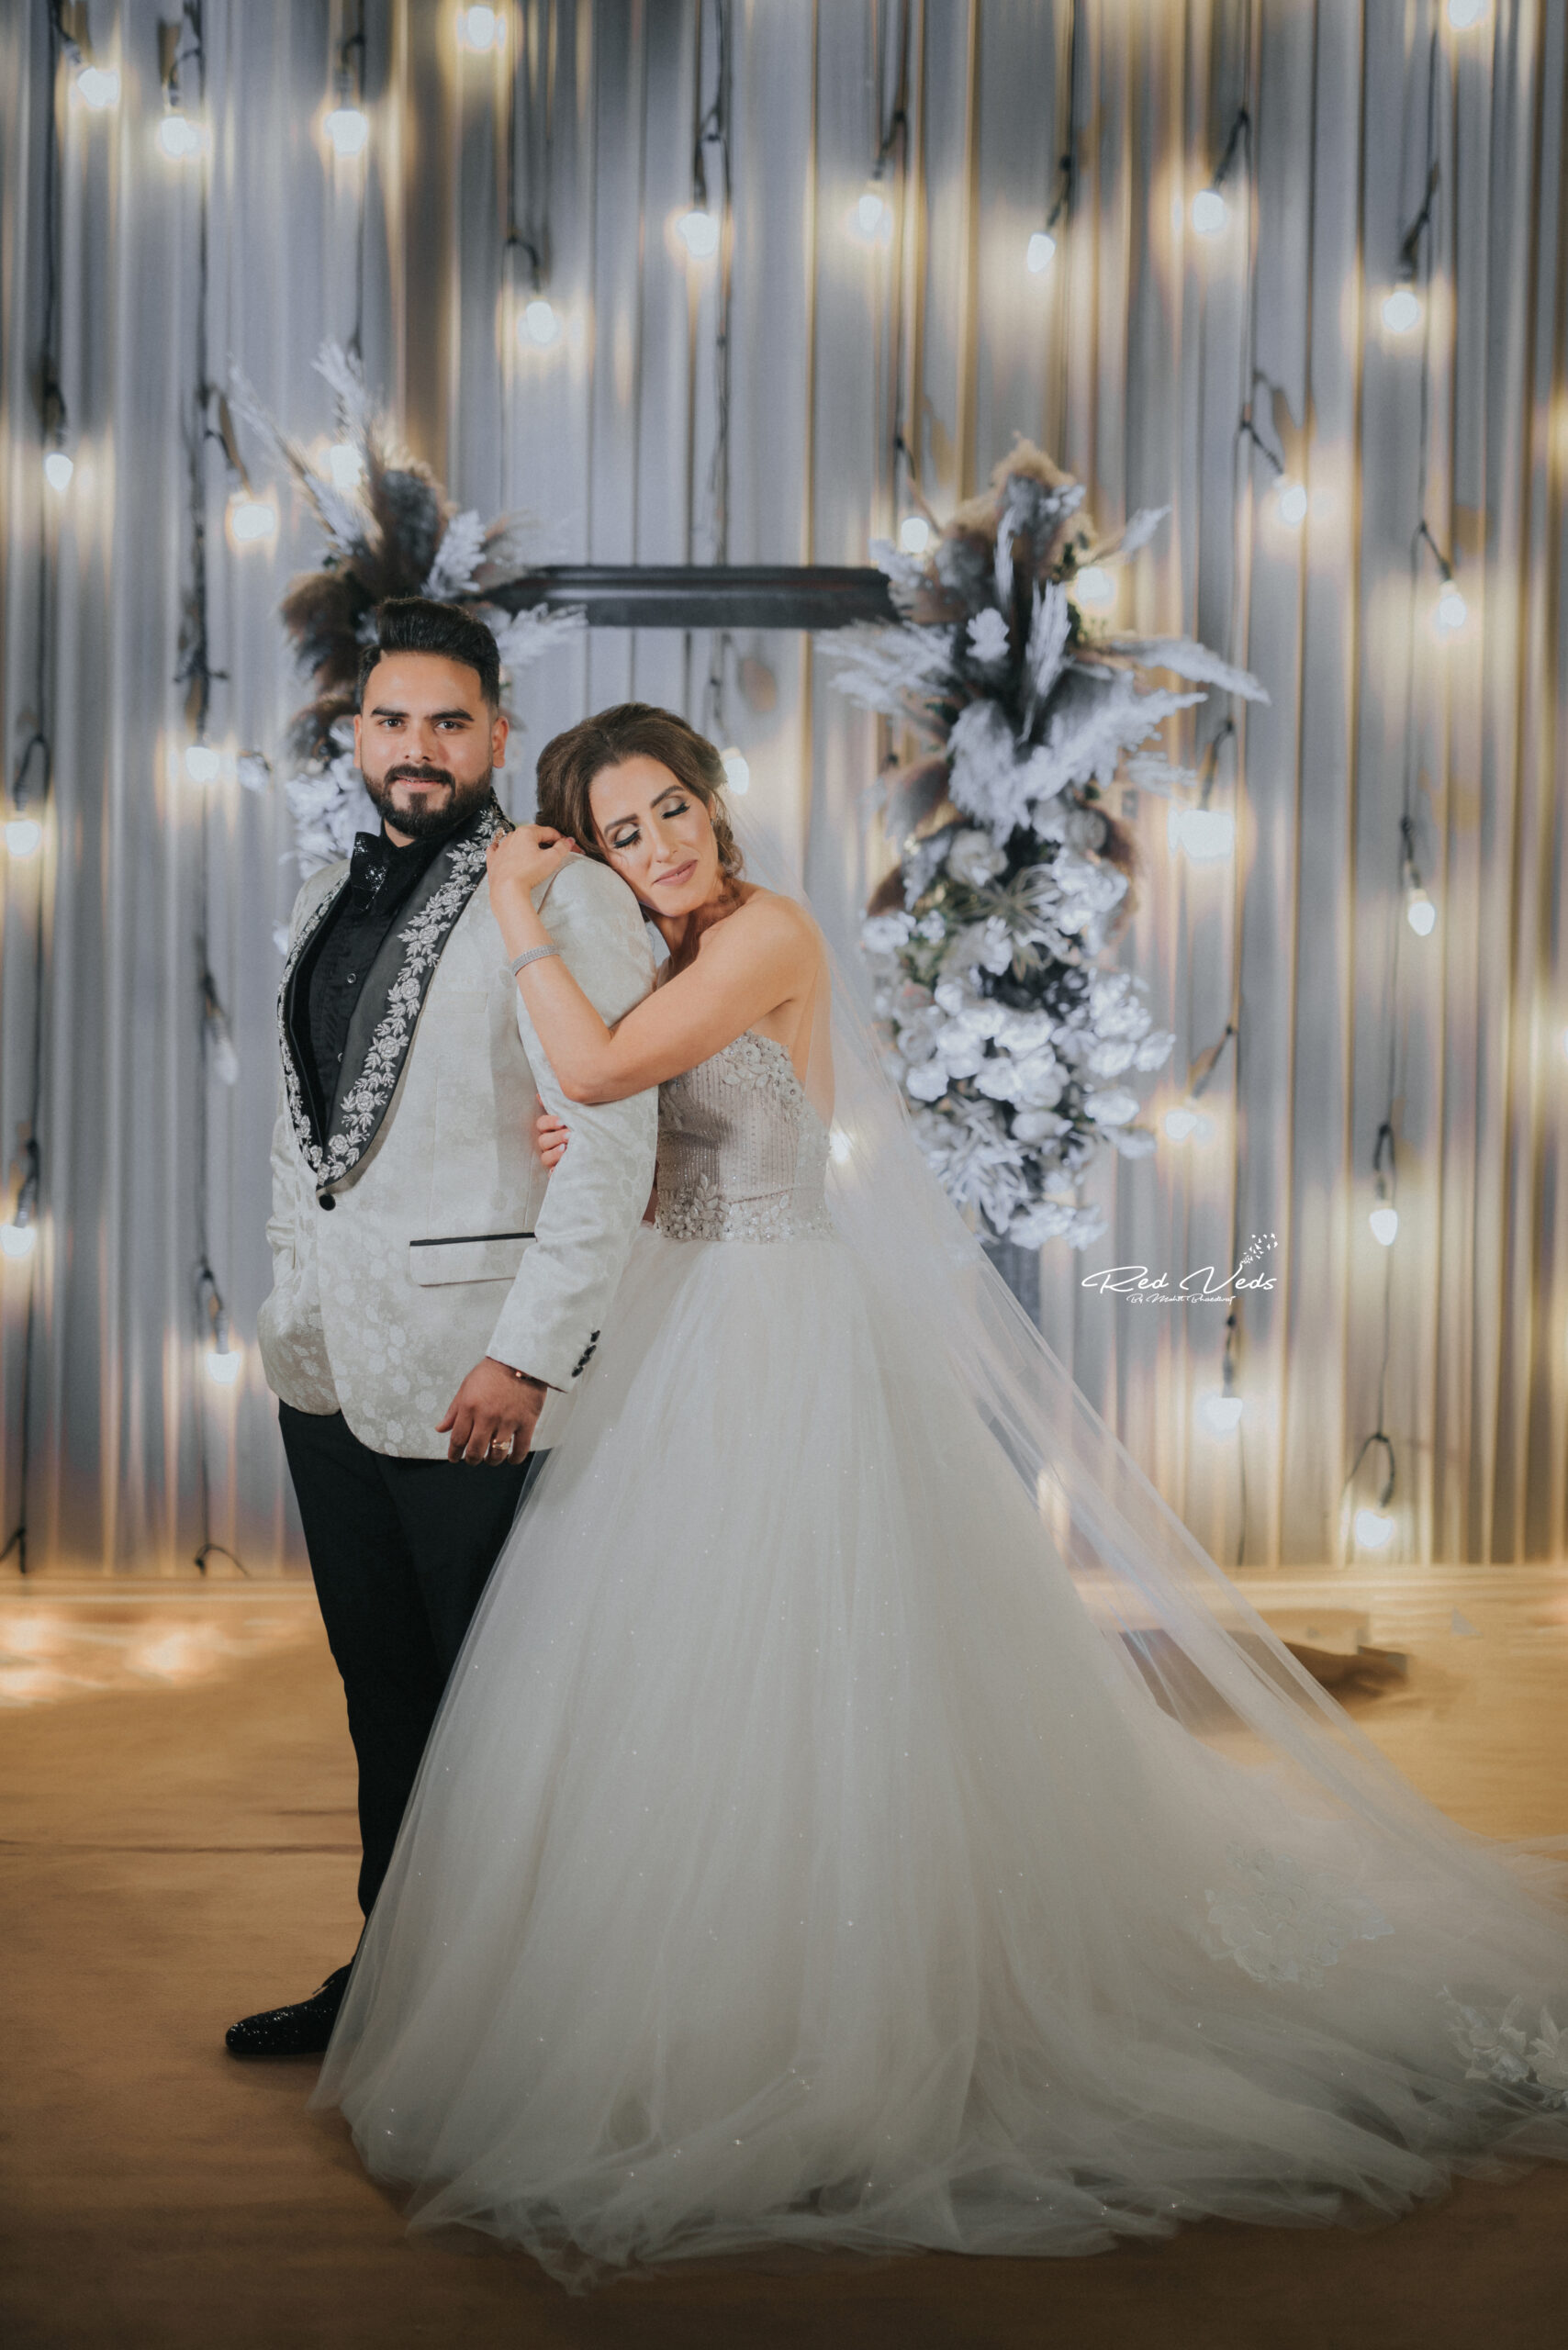 Love Story Shot - Bride and Groom in a Nice Outfits. Best Locations  WeddingNet | Indian wedding photography poses, Christian wedding dress, Christian  wedding gowns